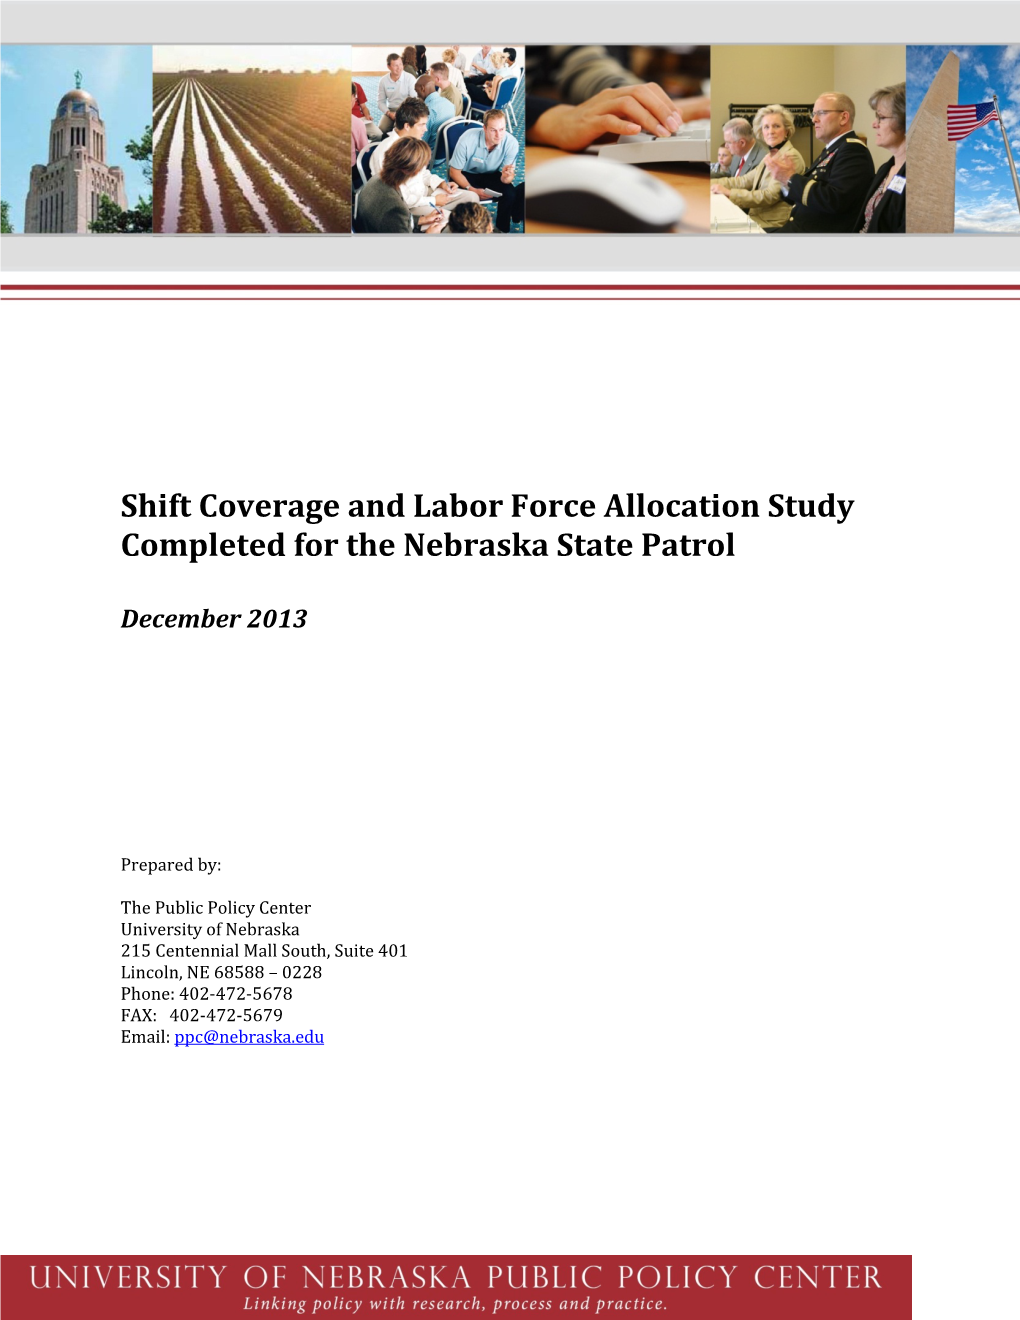 Shift Coverage and Labor Force Allocation Study Completed for the Nebraska State Patrol